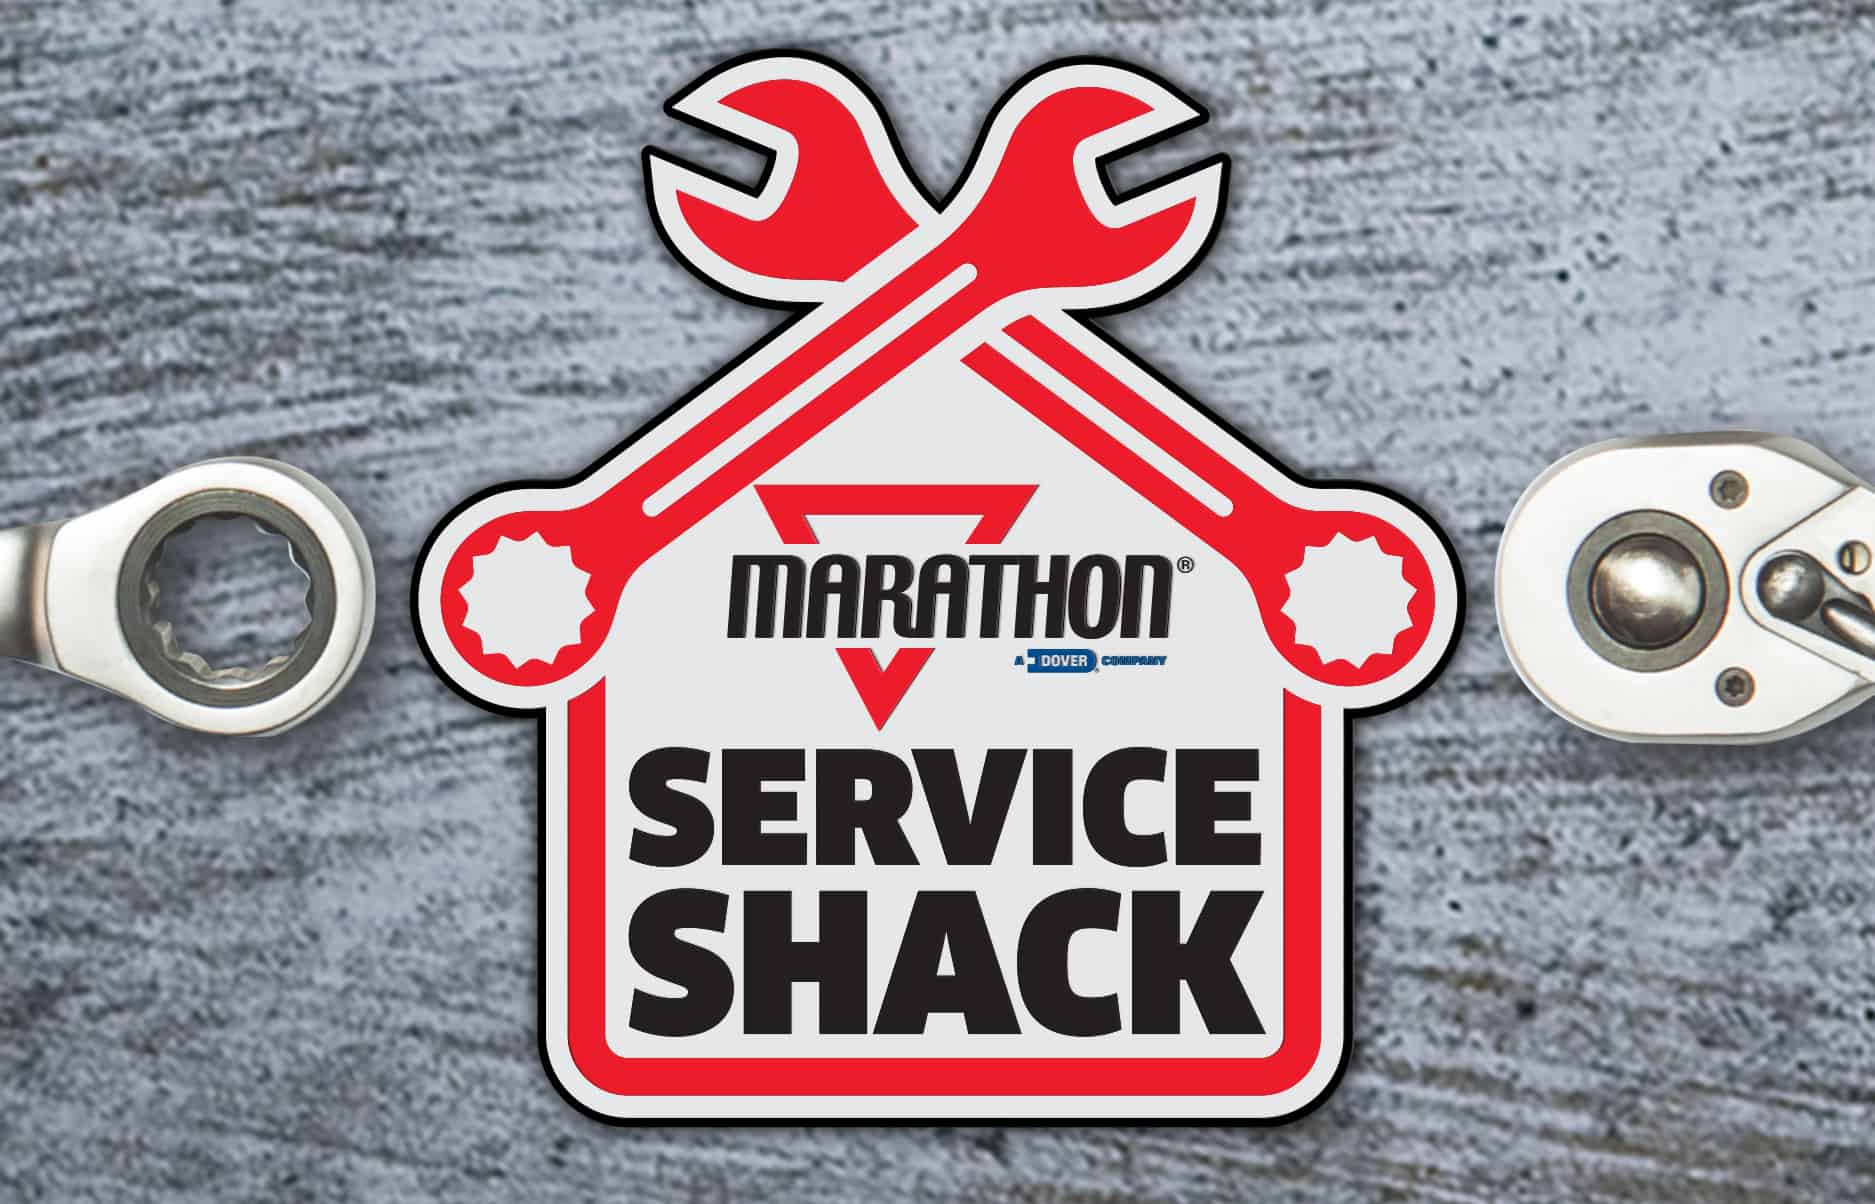 Marathon Offers New Video-Based Maintenance and Service Video Series